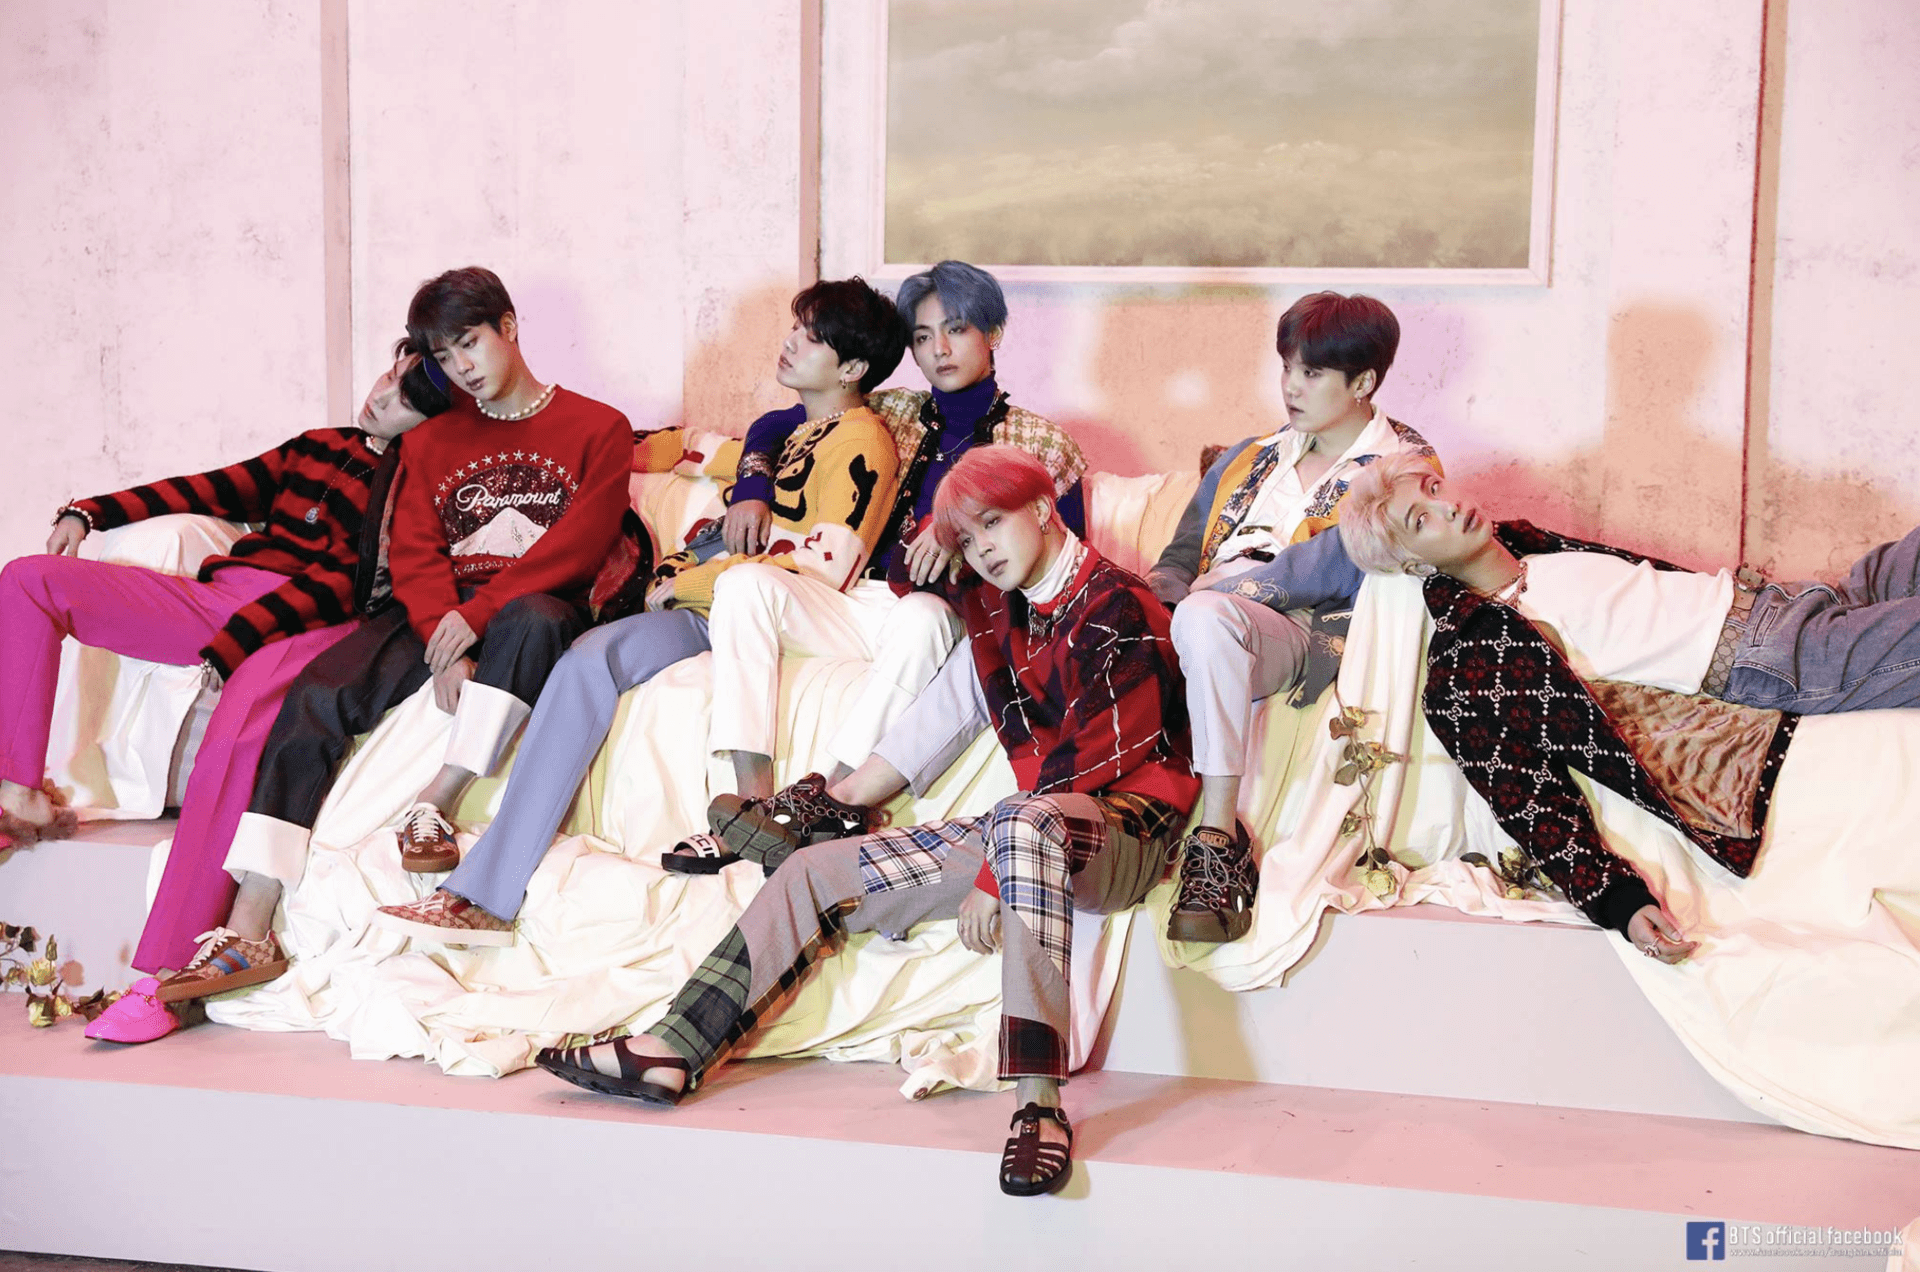 BTS Explores Self Image, The Cost Of Fame, And Acceptance In “Map Of